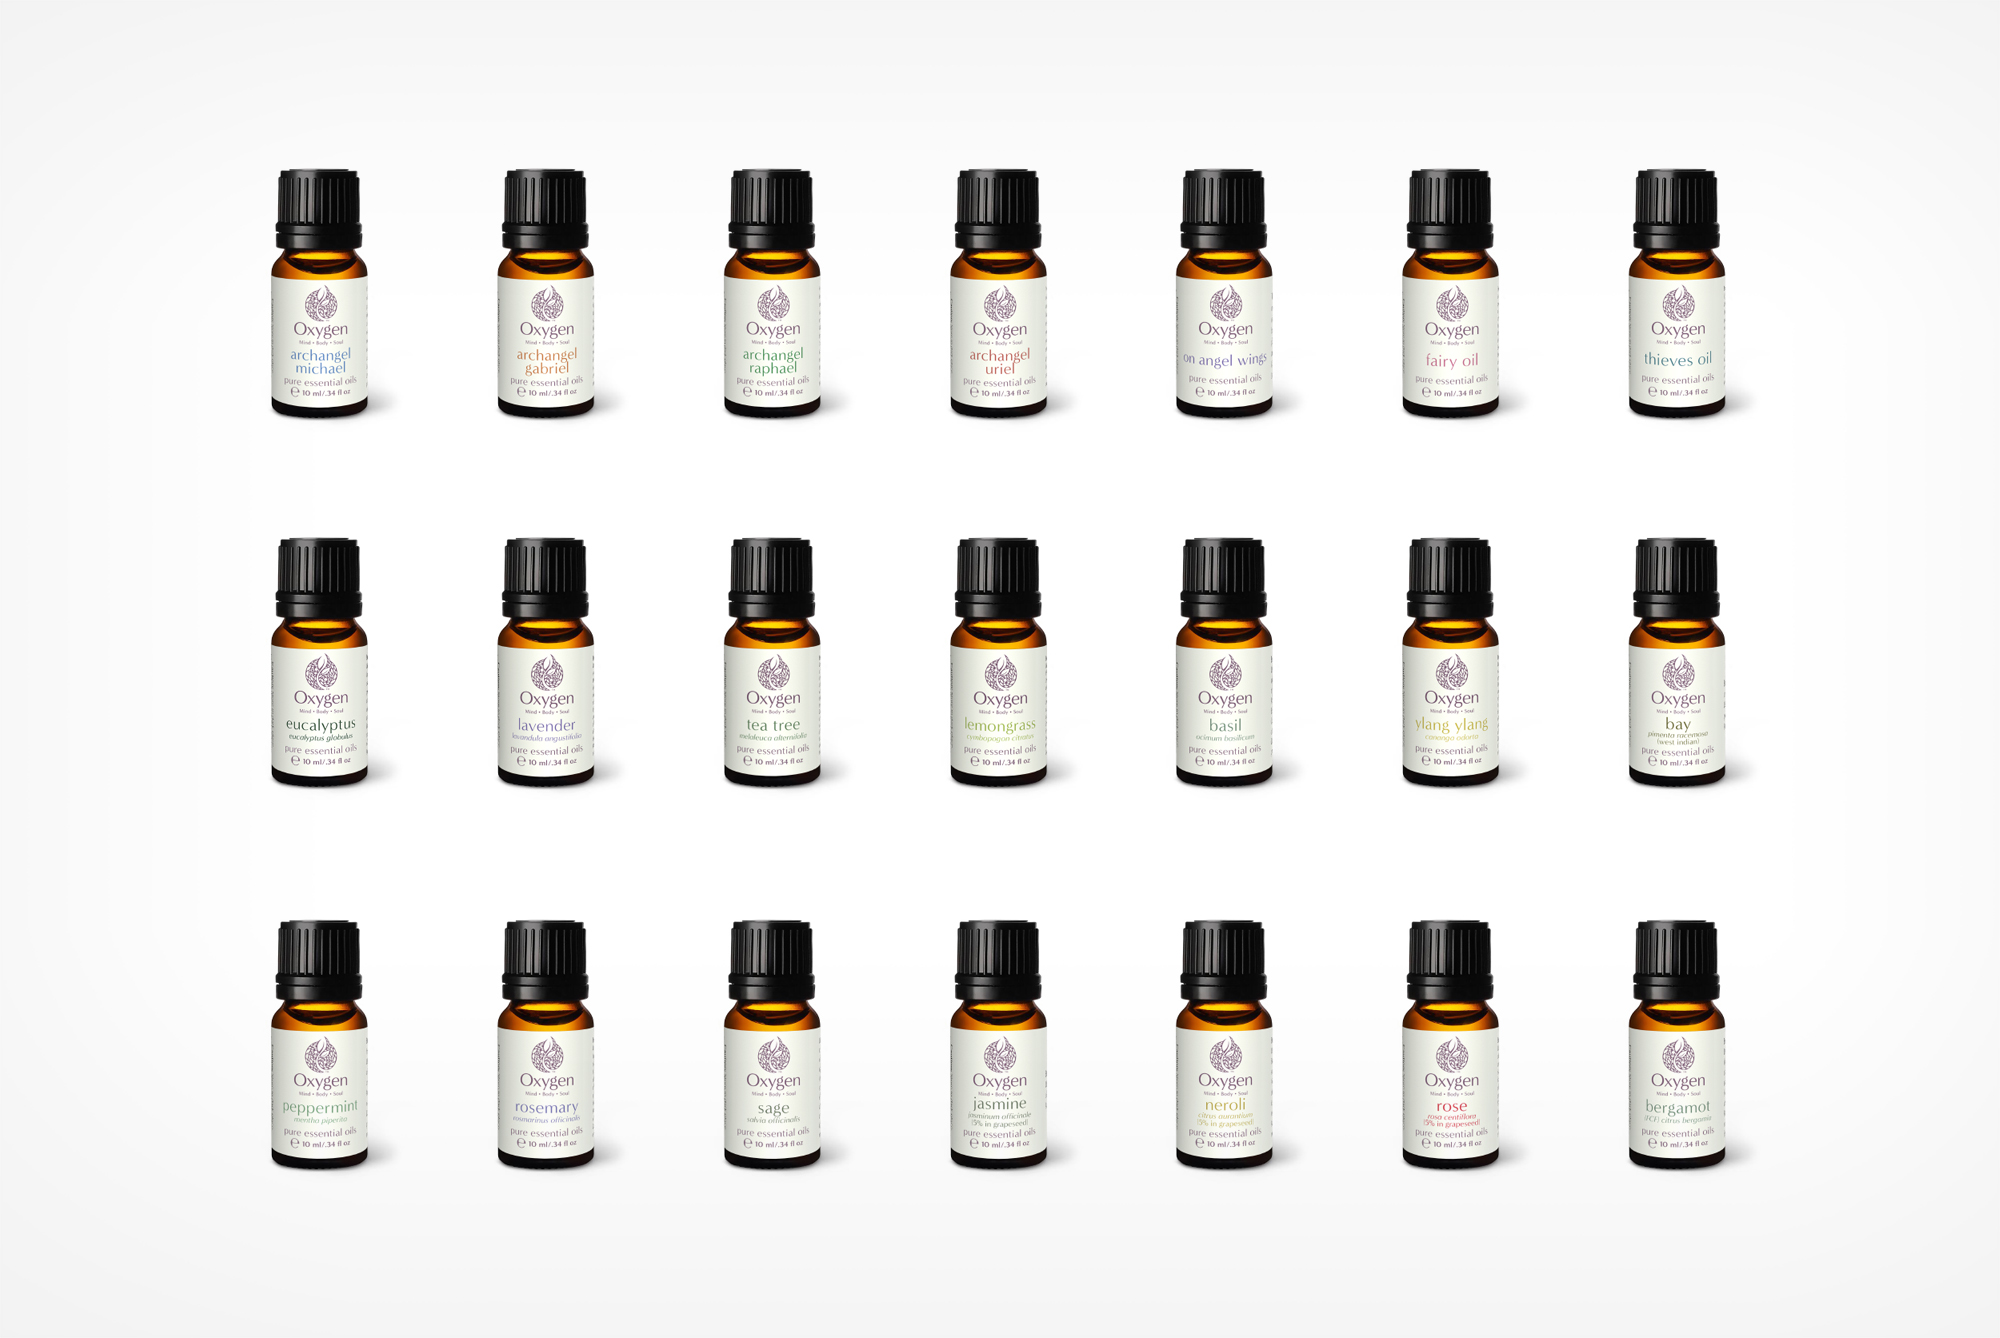 Brand label designs for Oxygen Wellness pure essential oils line of products